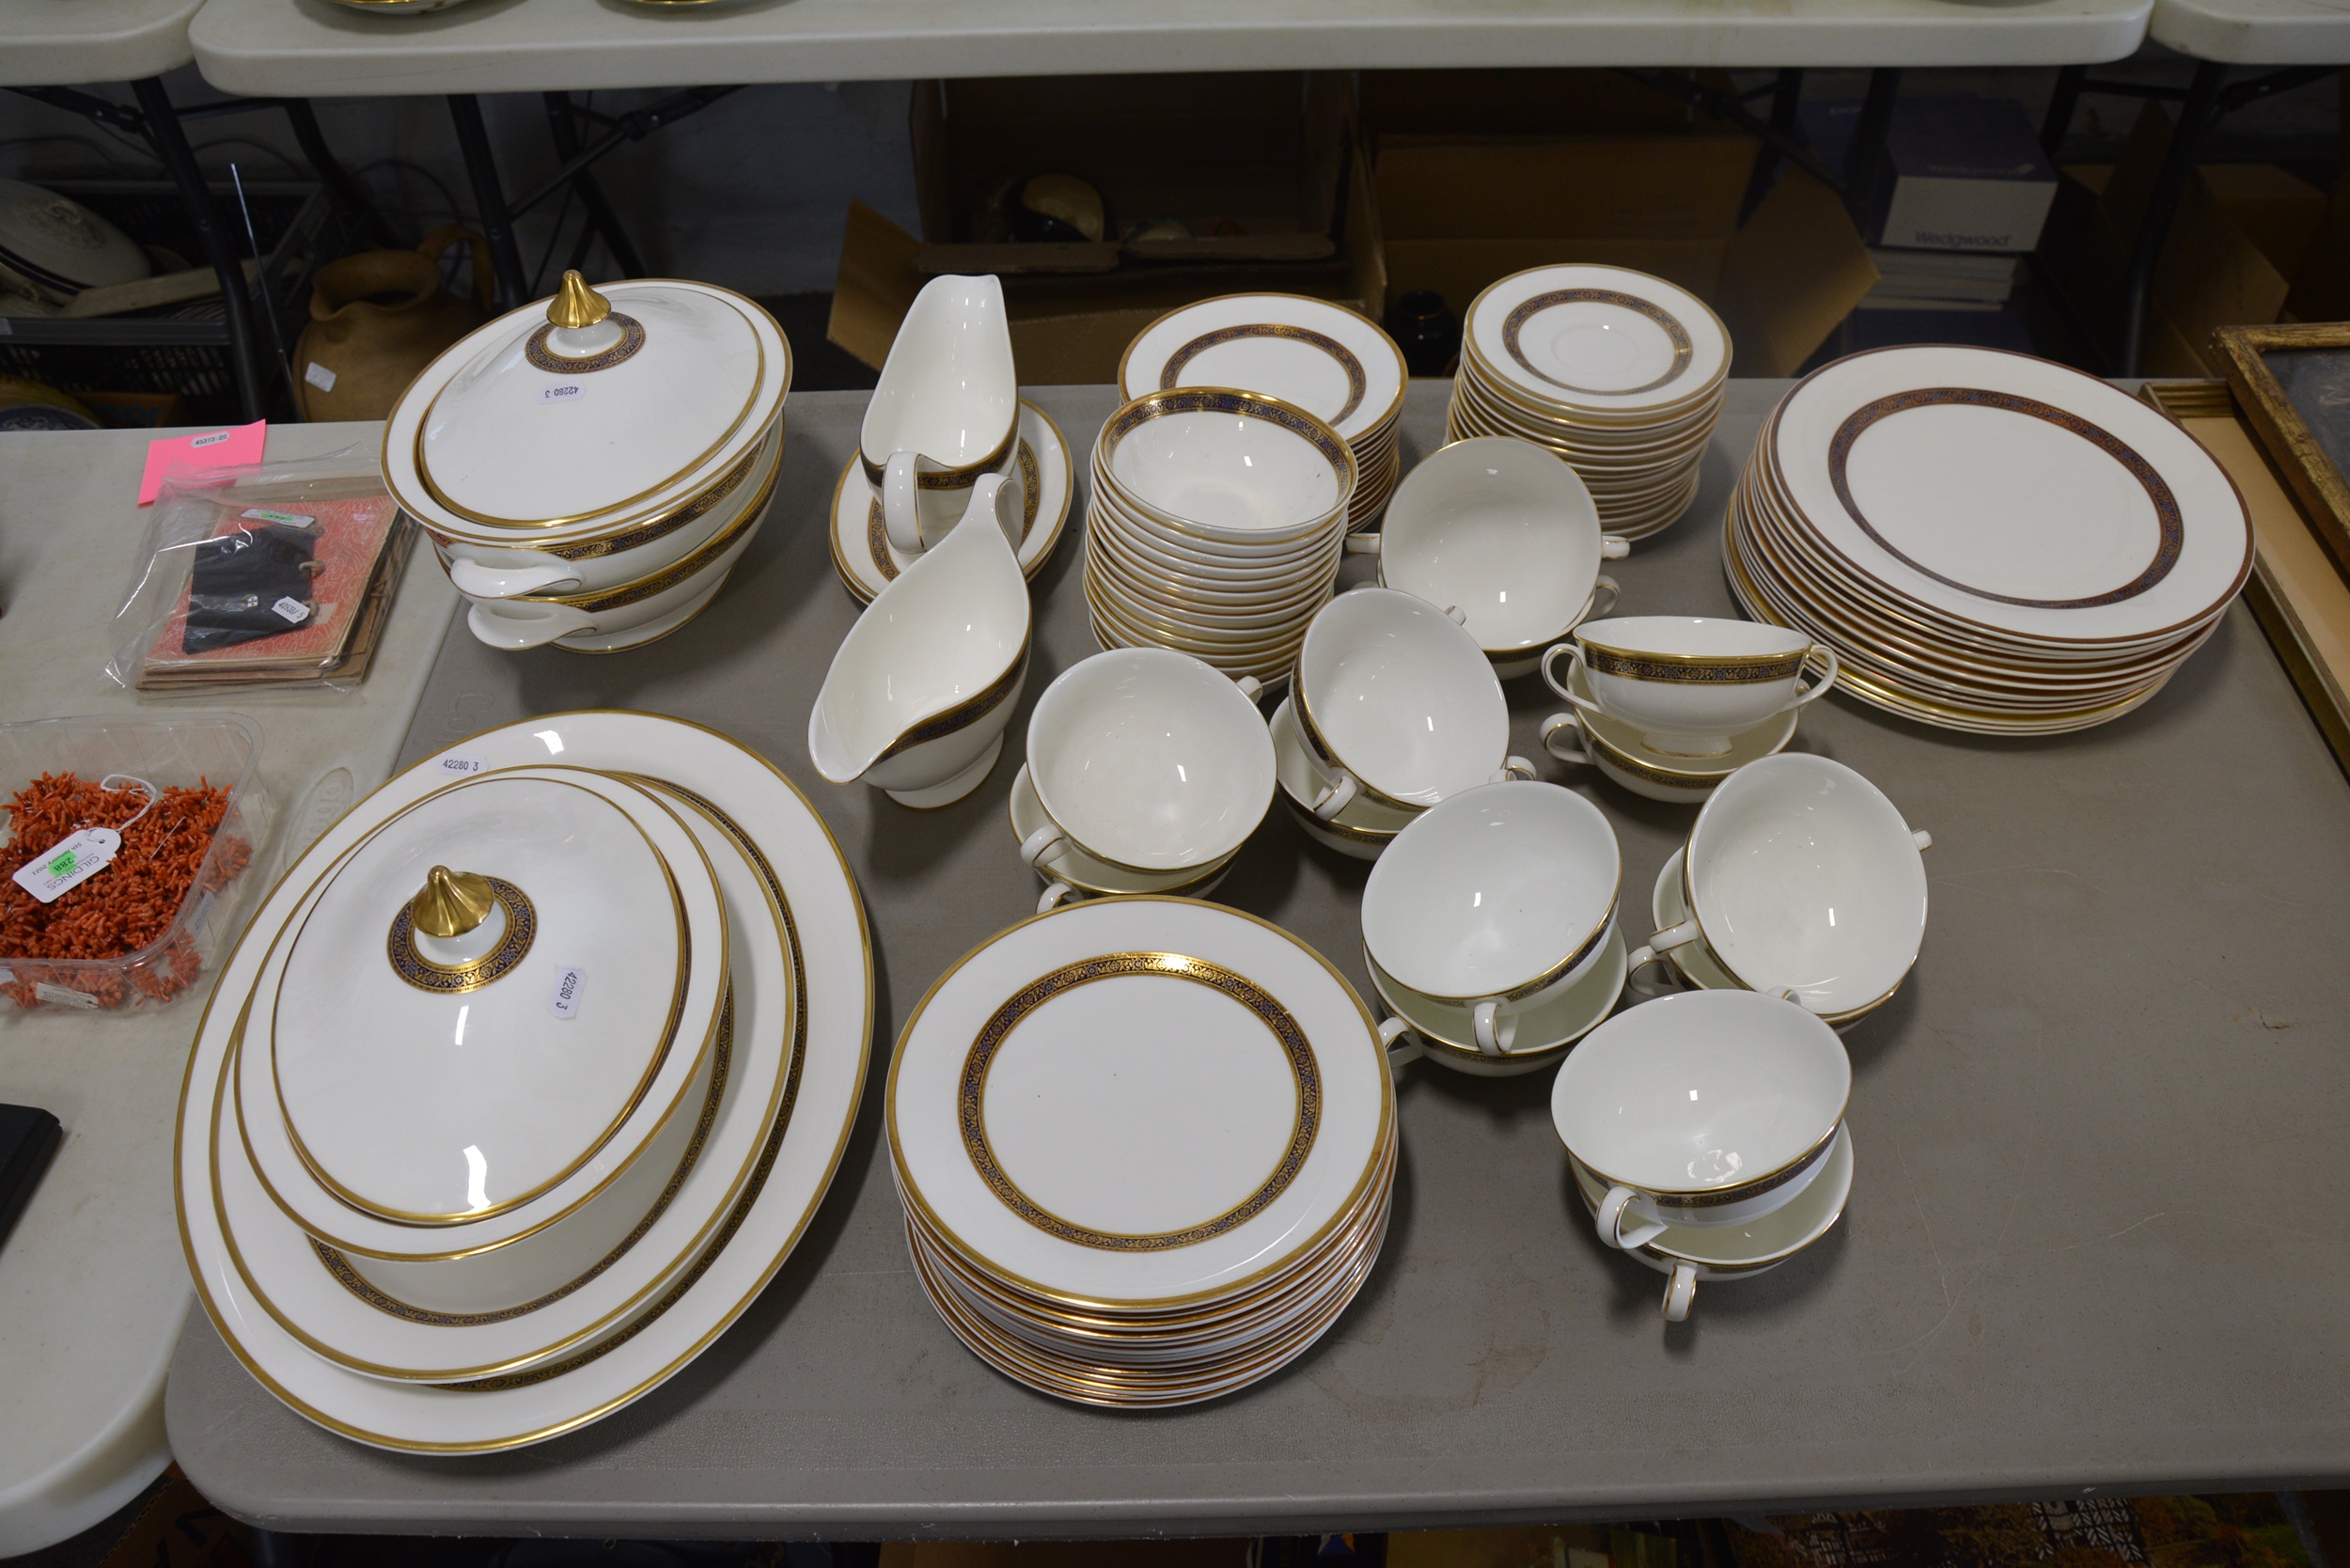 Royal Doulton "Harlow" pattern dinner service. - Image 2 of 2